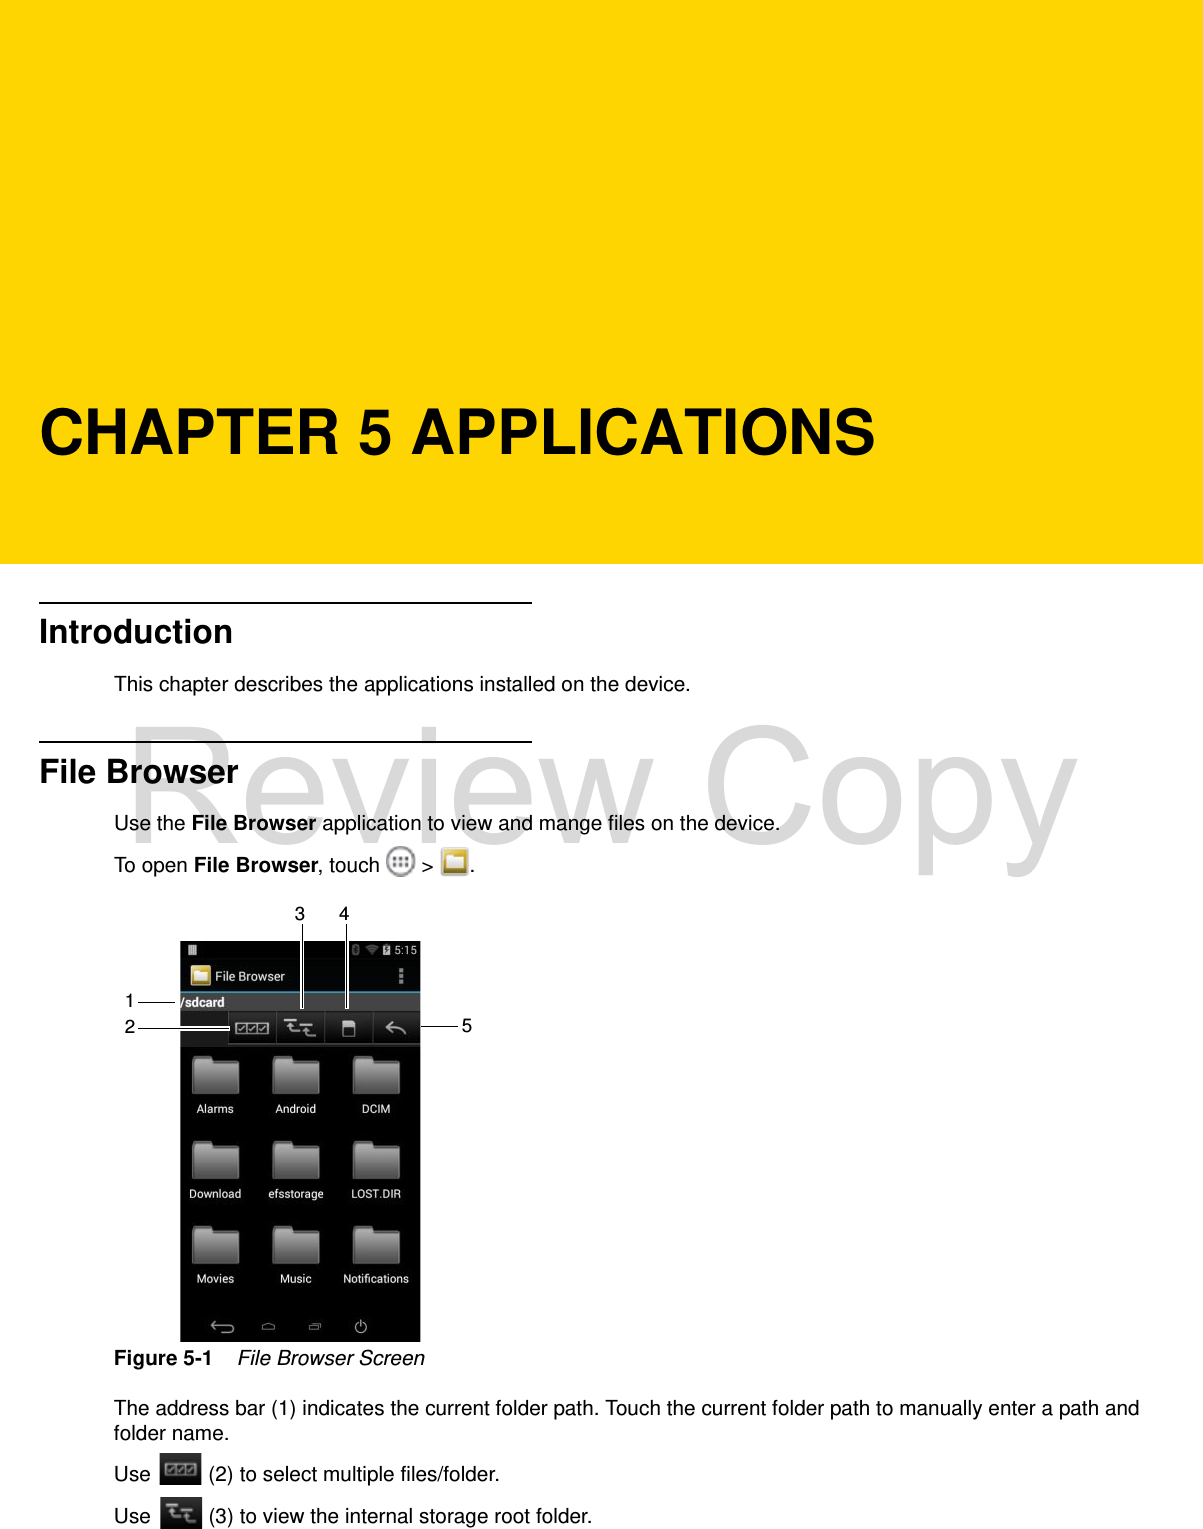 CHAPTER 5 APPLICATIONSIntroductionThis chapter describes the applications installed on the device.File BrowserUse the File Browser application to view and mange files on the device.To open File Browser, touch   &gt;  .Figure 5-1    File Browser ScreenThe address bar (1) indicates the current folder path. Touch the current folder path to manually enter a path and folder name.Use   (2) to select multiple files/folder.Use   (3) to view the internal storage root folder.123 45Review Copy